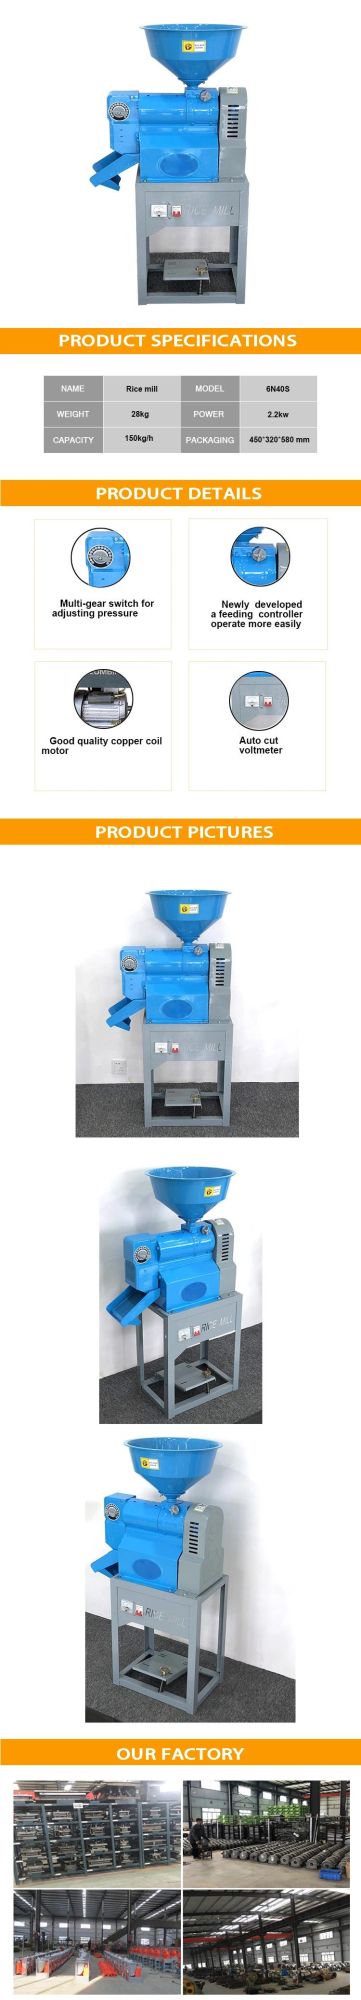 Small Capacity Combined Rice Husker and Whitener Machine for Farm